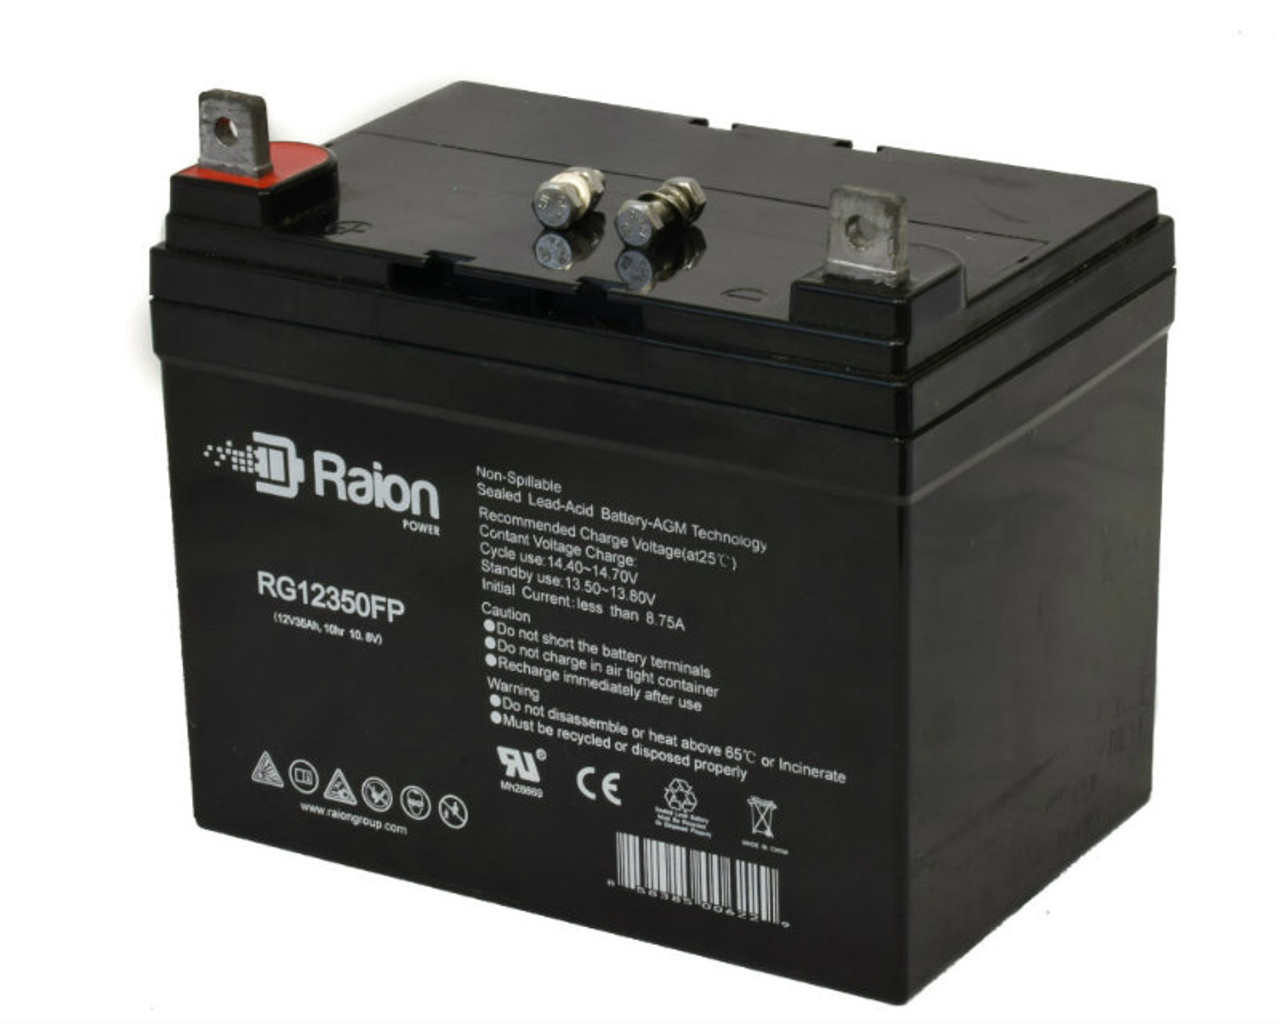 Raion Power Replacement 12V 35Ah Battery for Dixon 7025 - 1 Pack